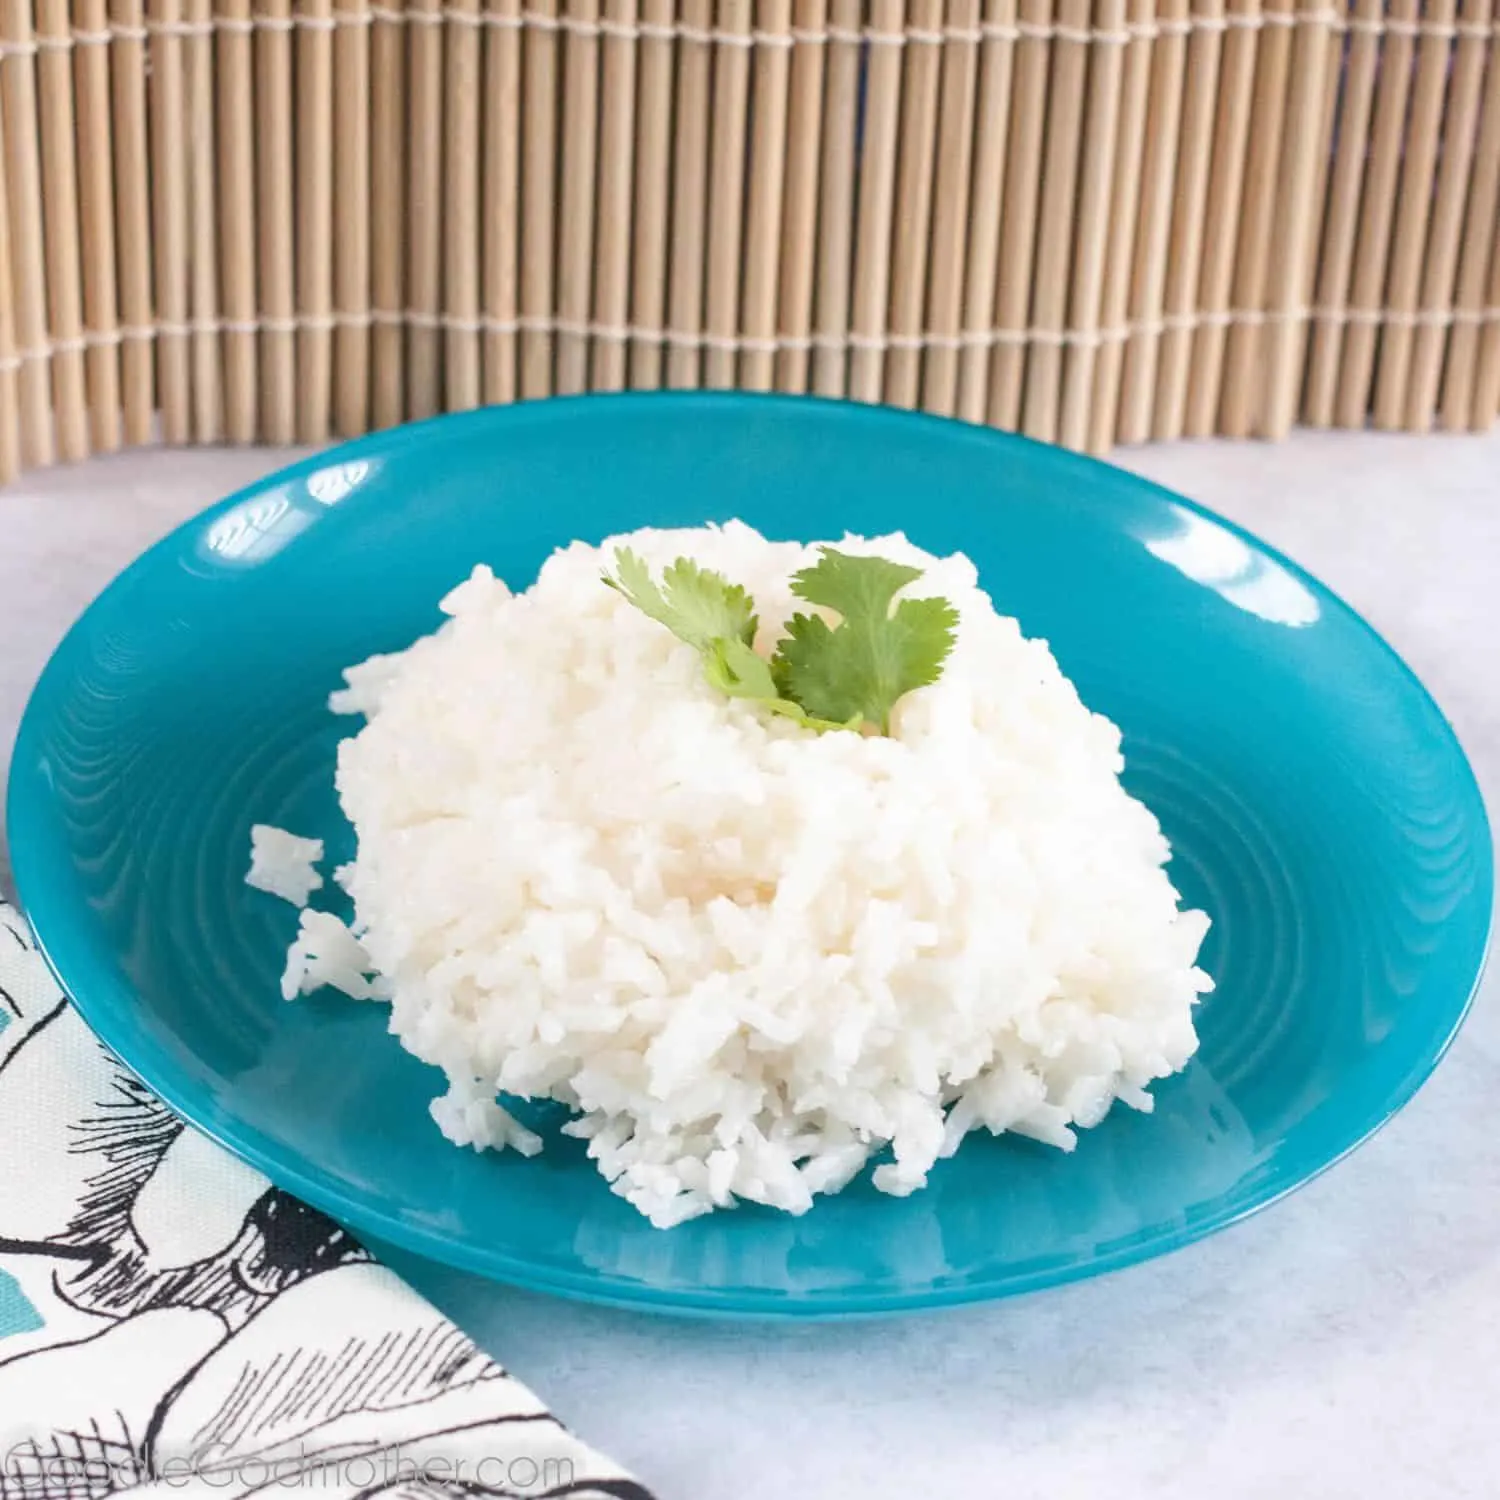 A unique and easy side dish, savory coconut rice pairs well with Thai food and tropical dishes. Learn how to make it on GoodieGodmother.com